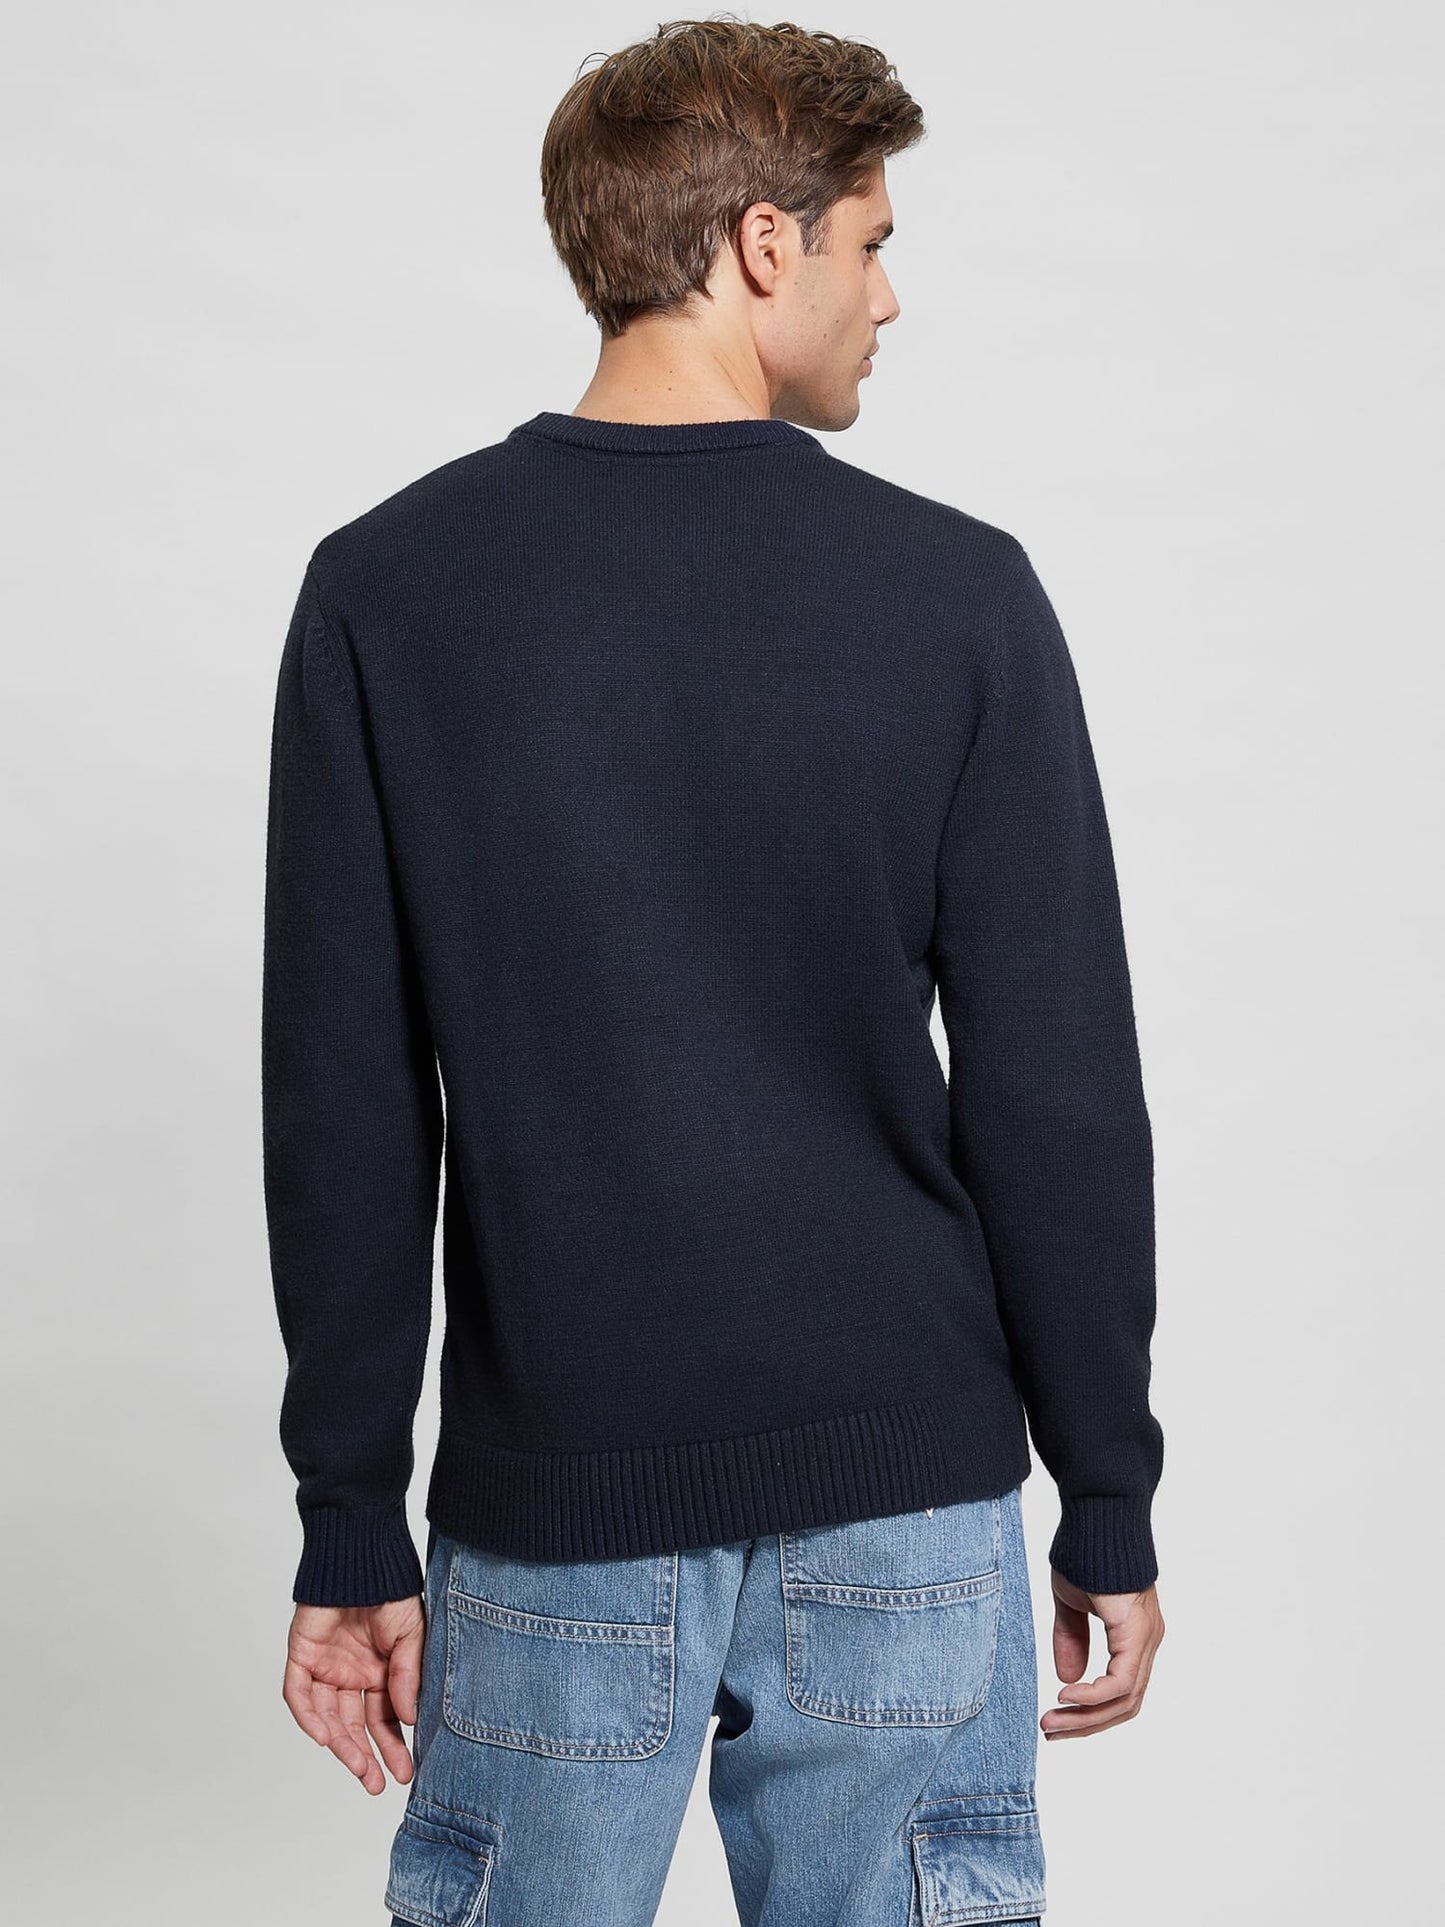 GUESS Navy Bear Long Sleeve Sweater back view